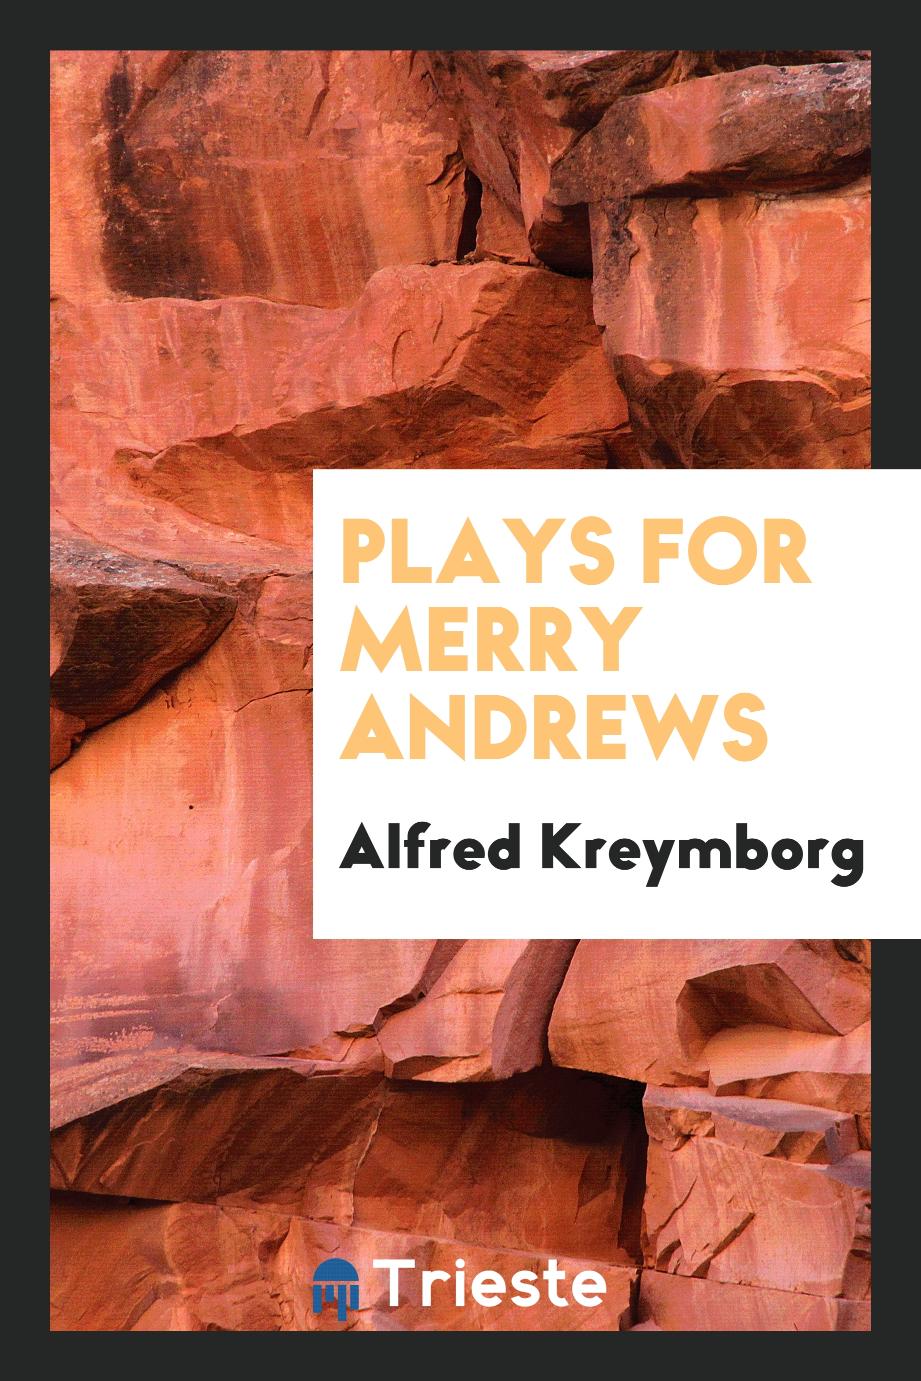 Plays for Merry Andrews